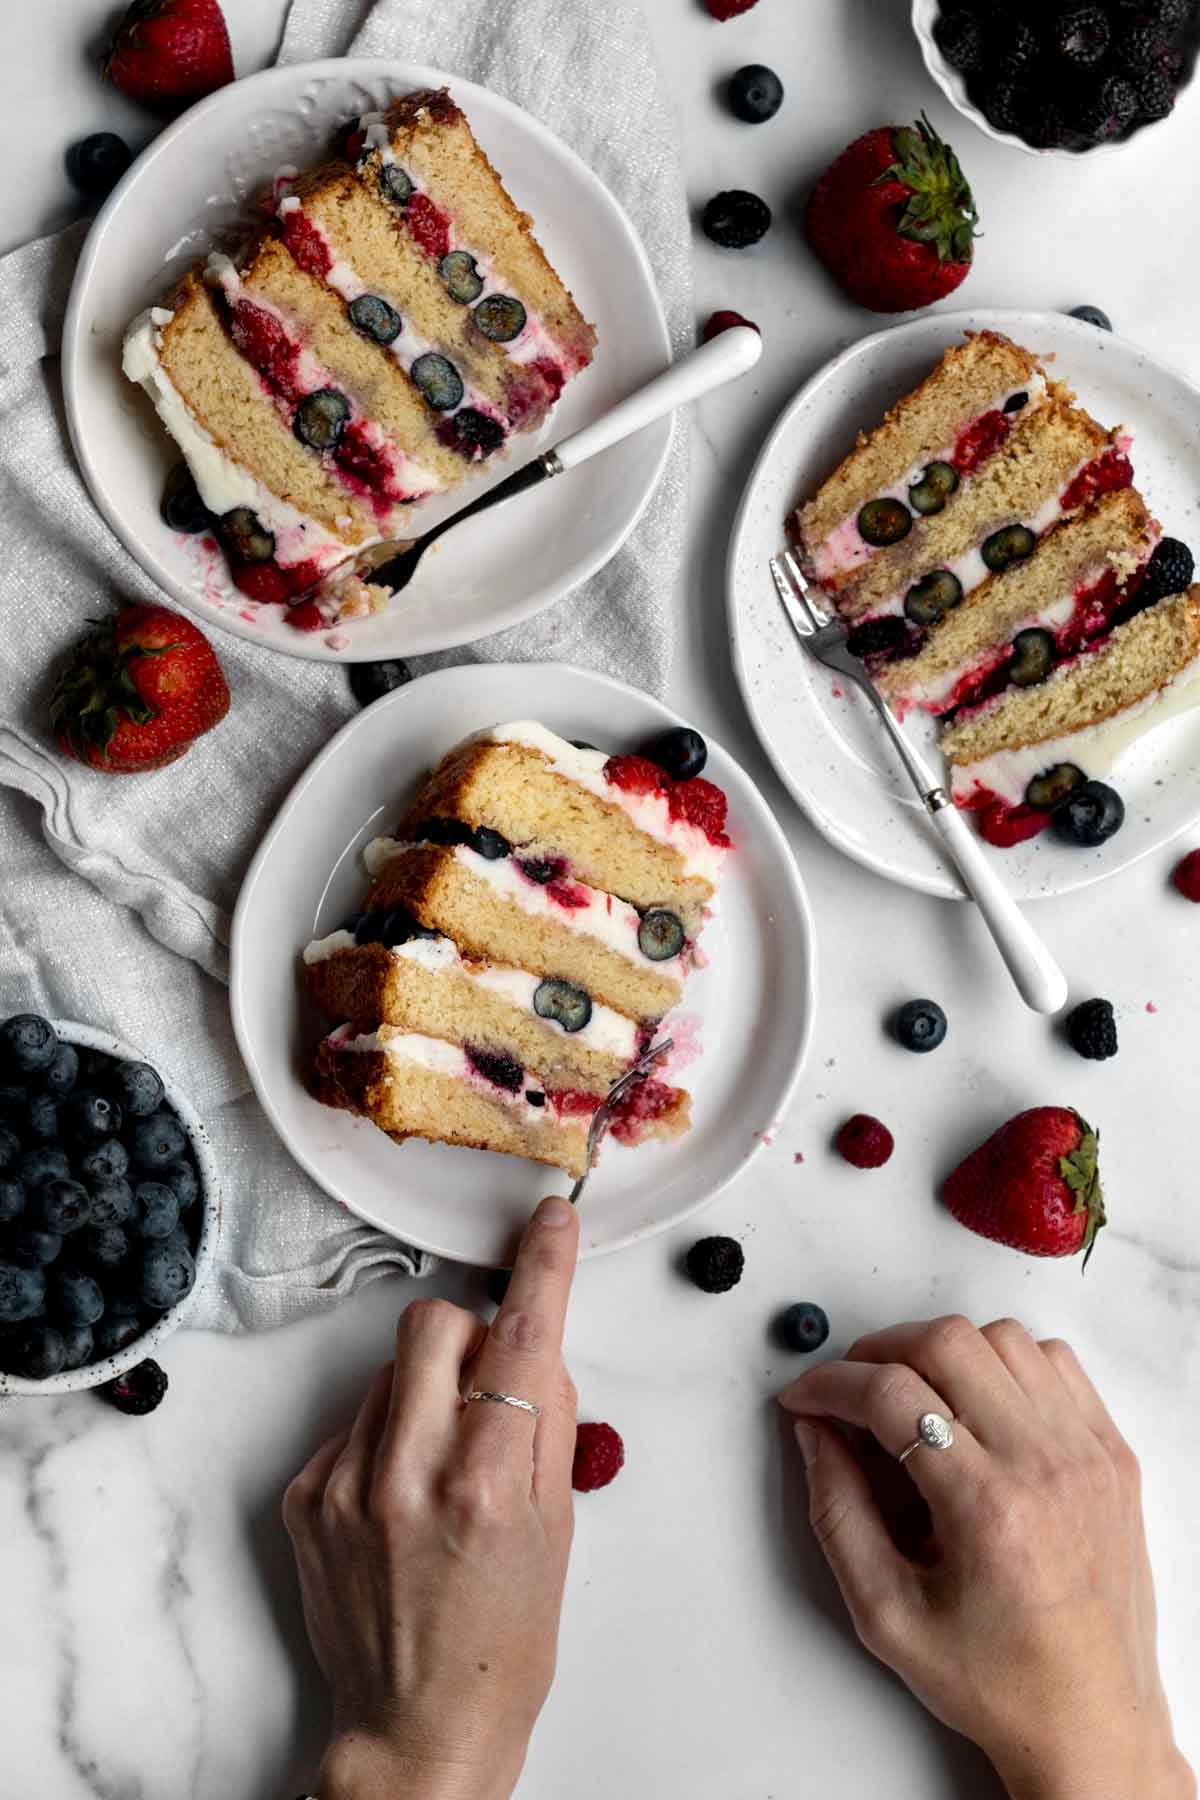 Three slices of Mixed Berry Cake on plates.